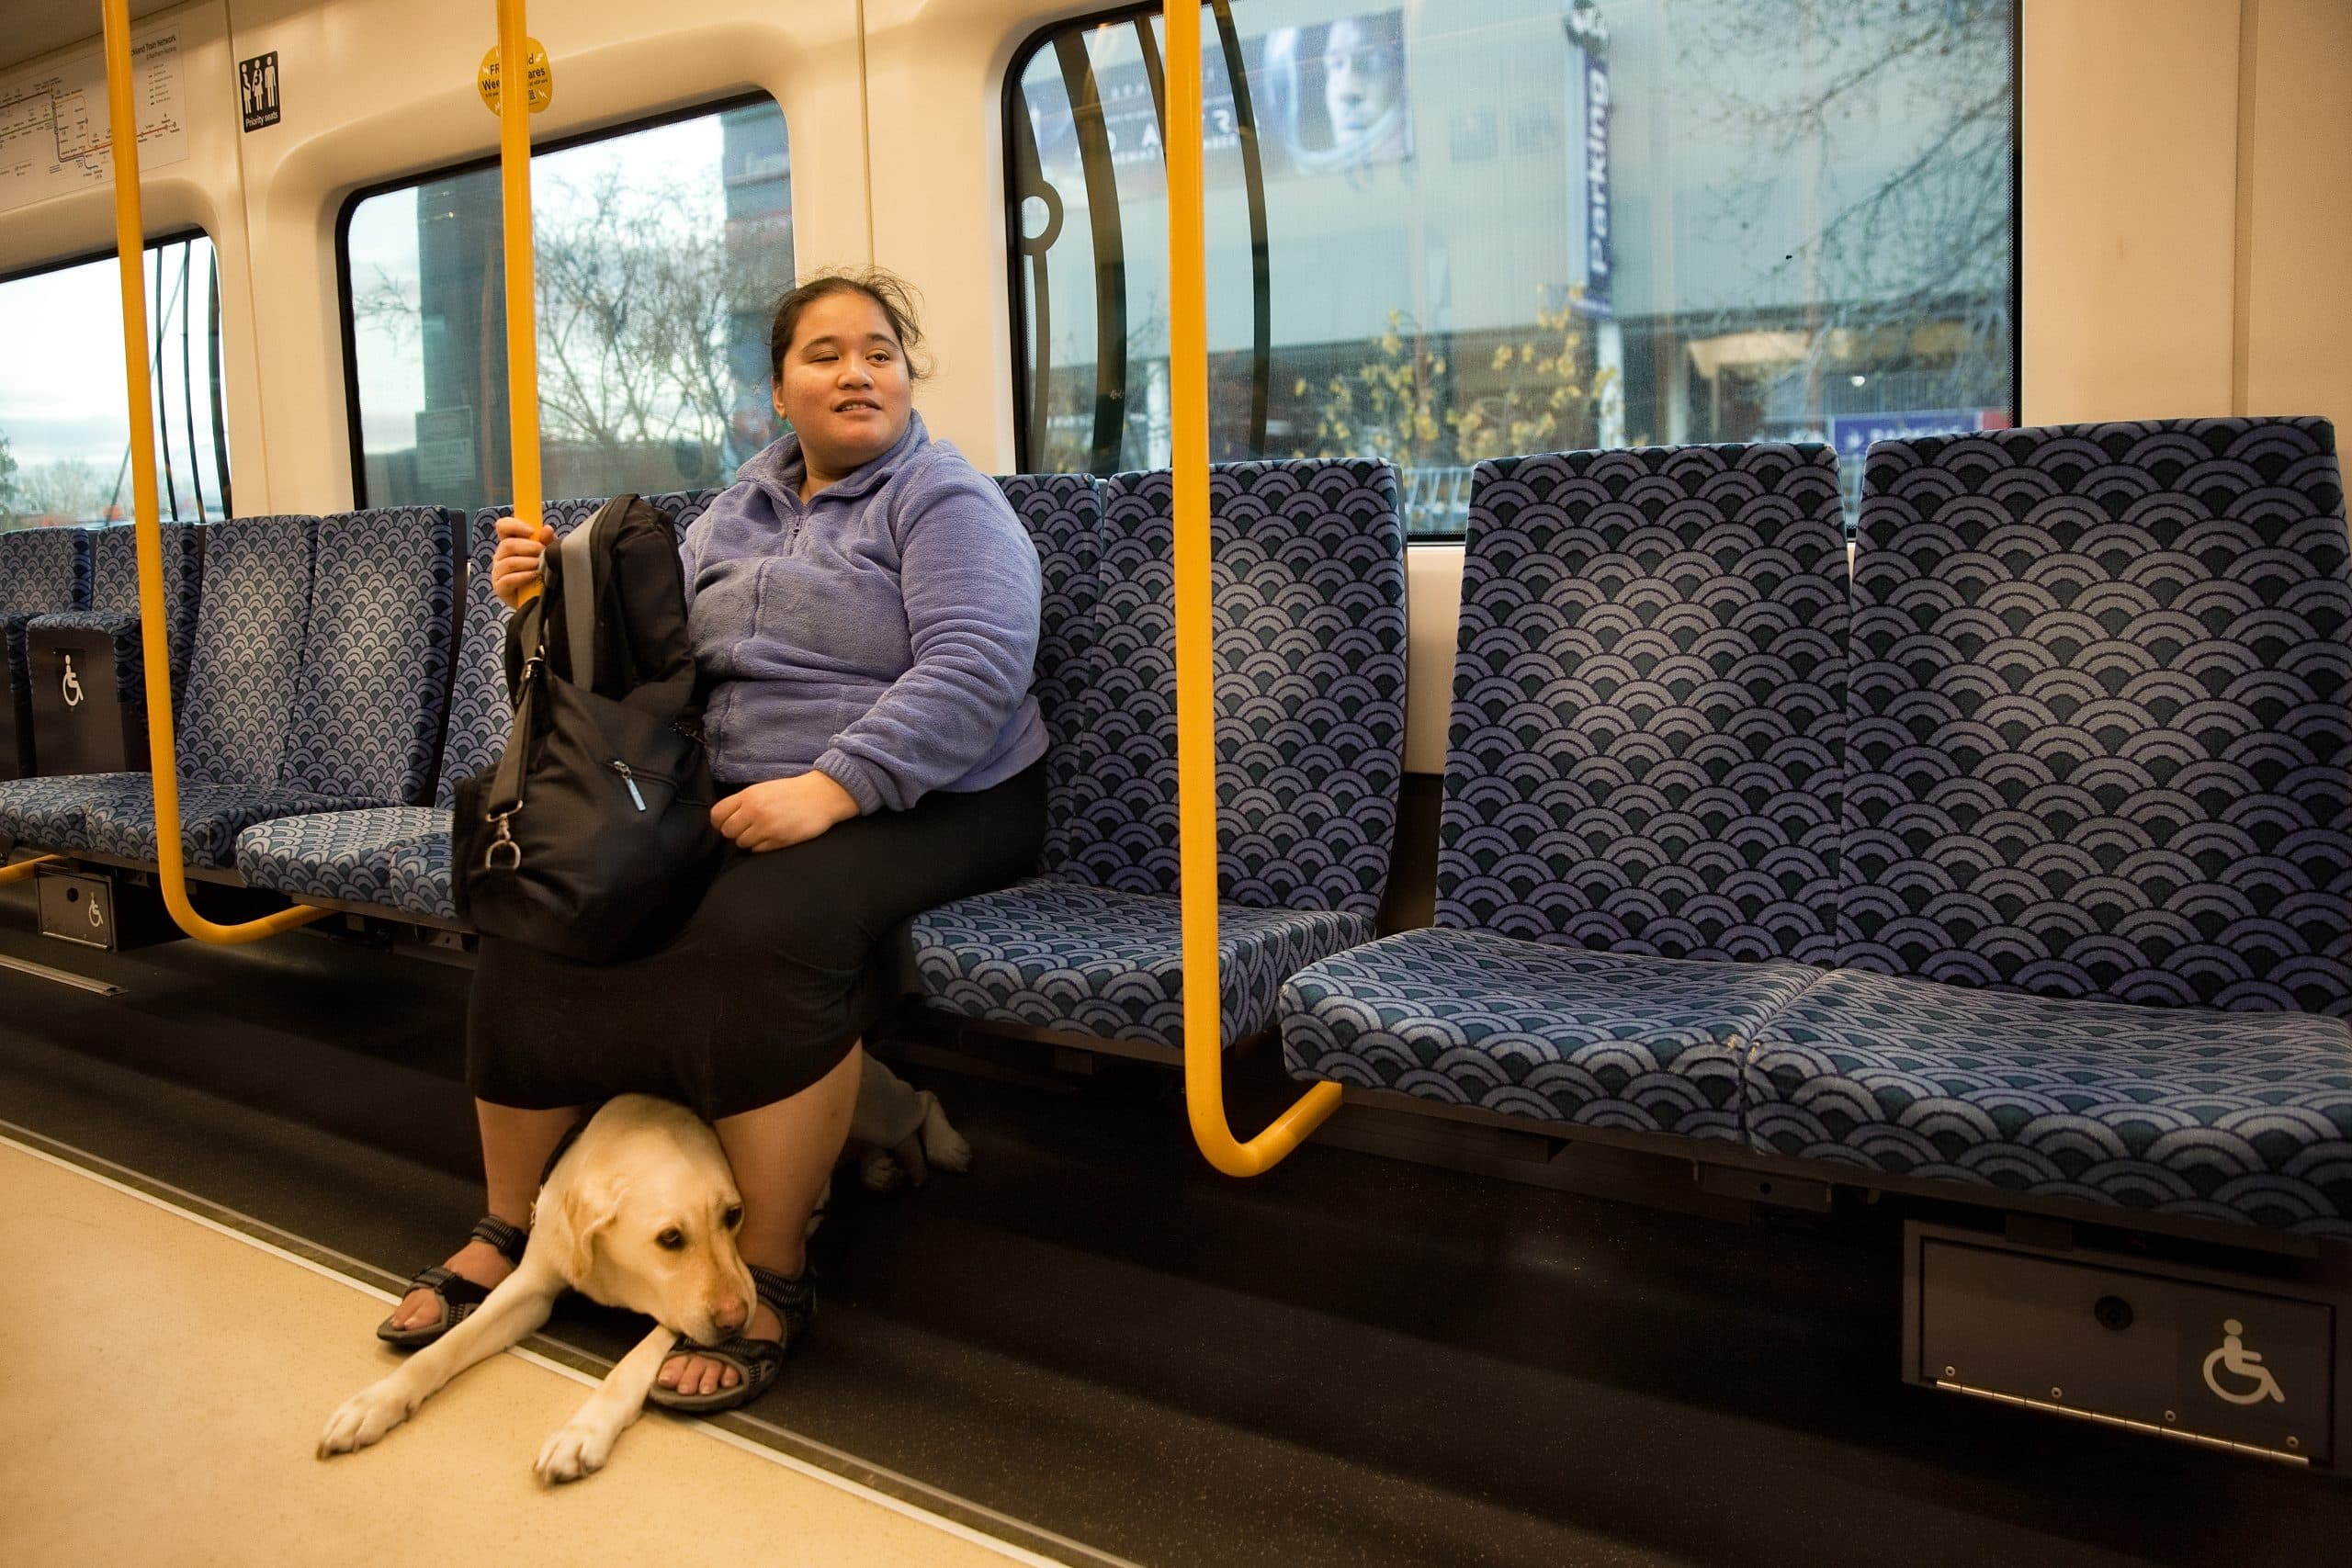 Client Sina and her guide dog are sitting on a train as she travels to work